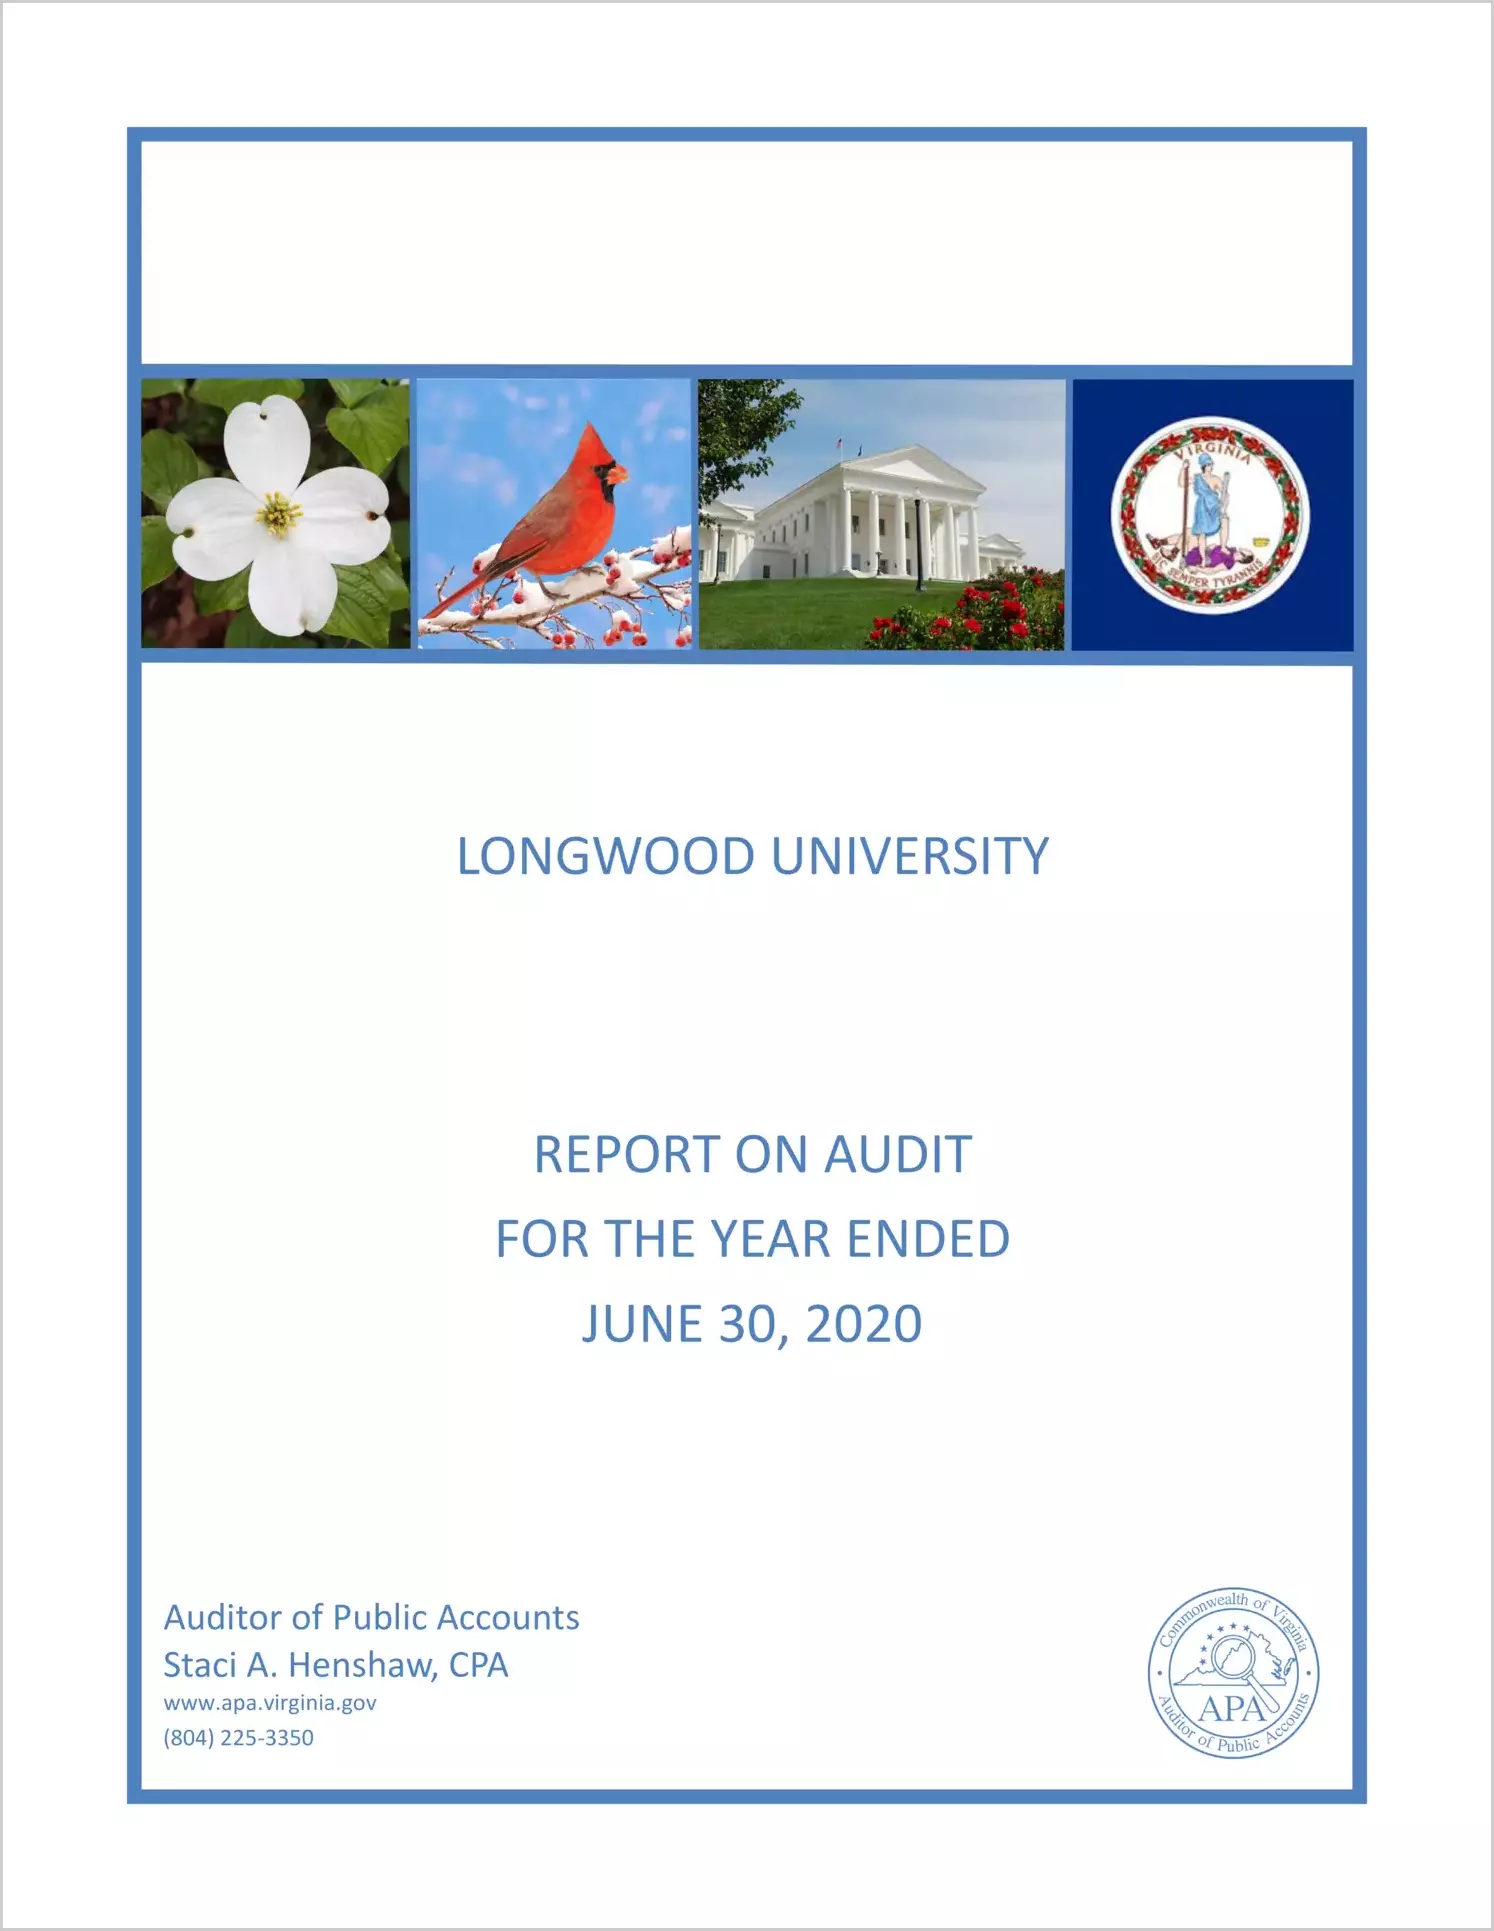 Longwood University for the year ended June 30, 2020